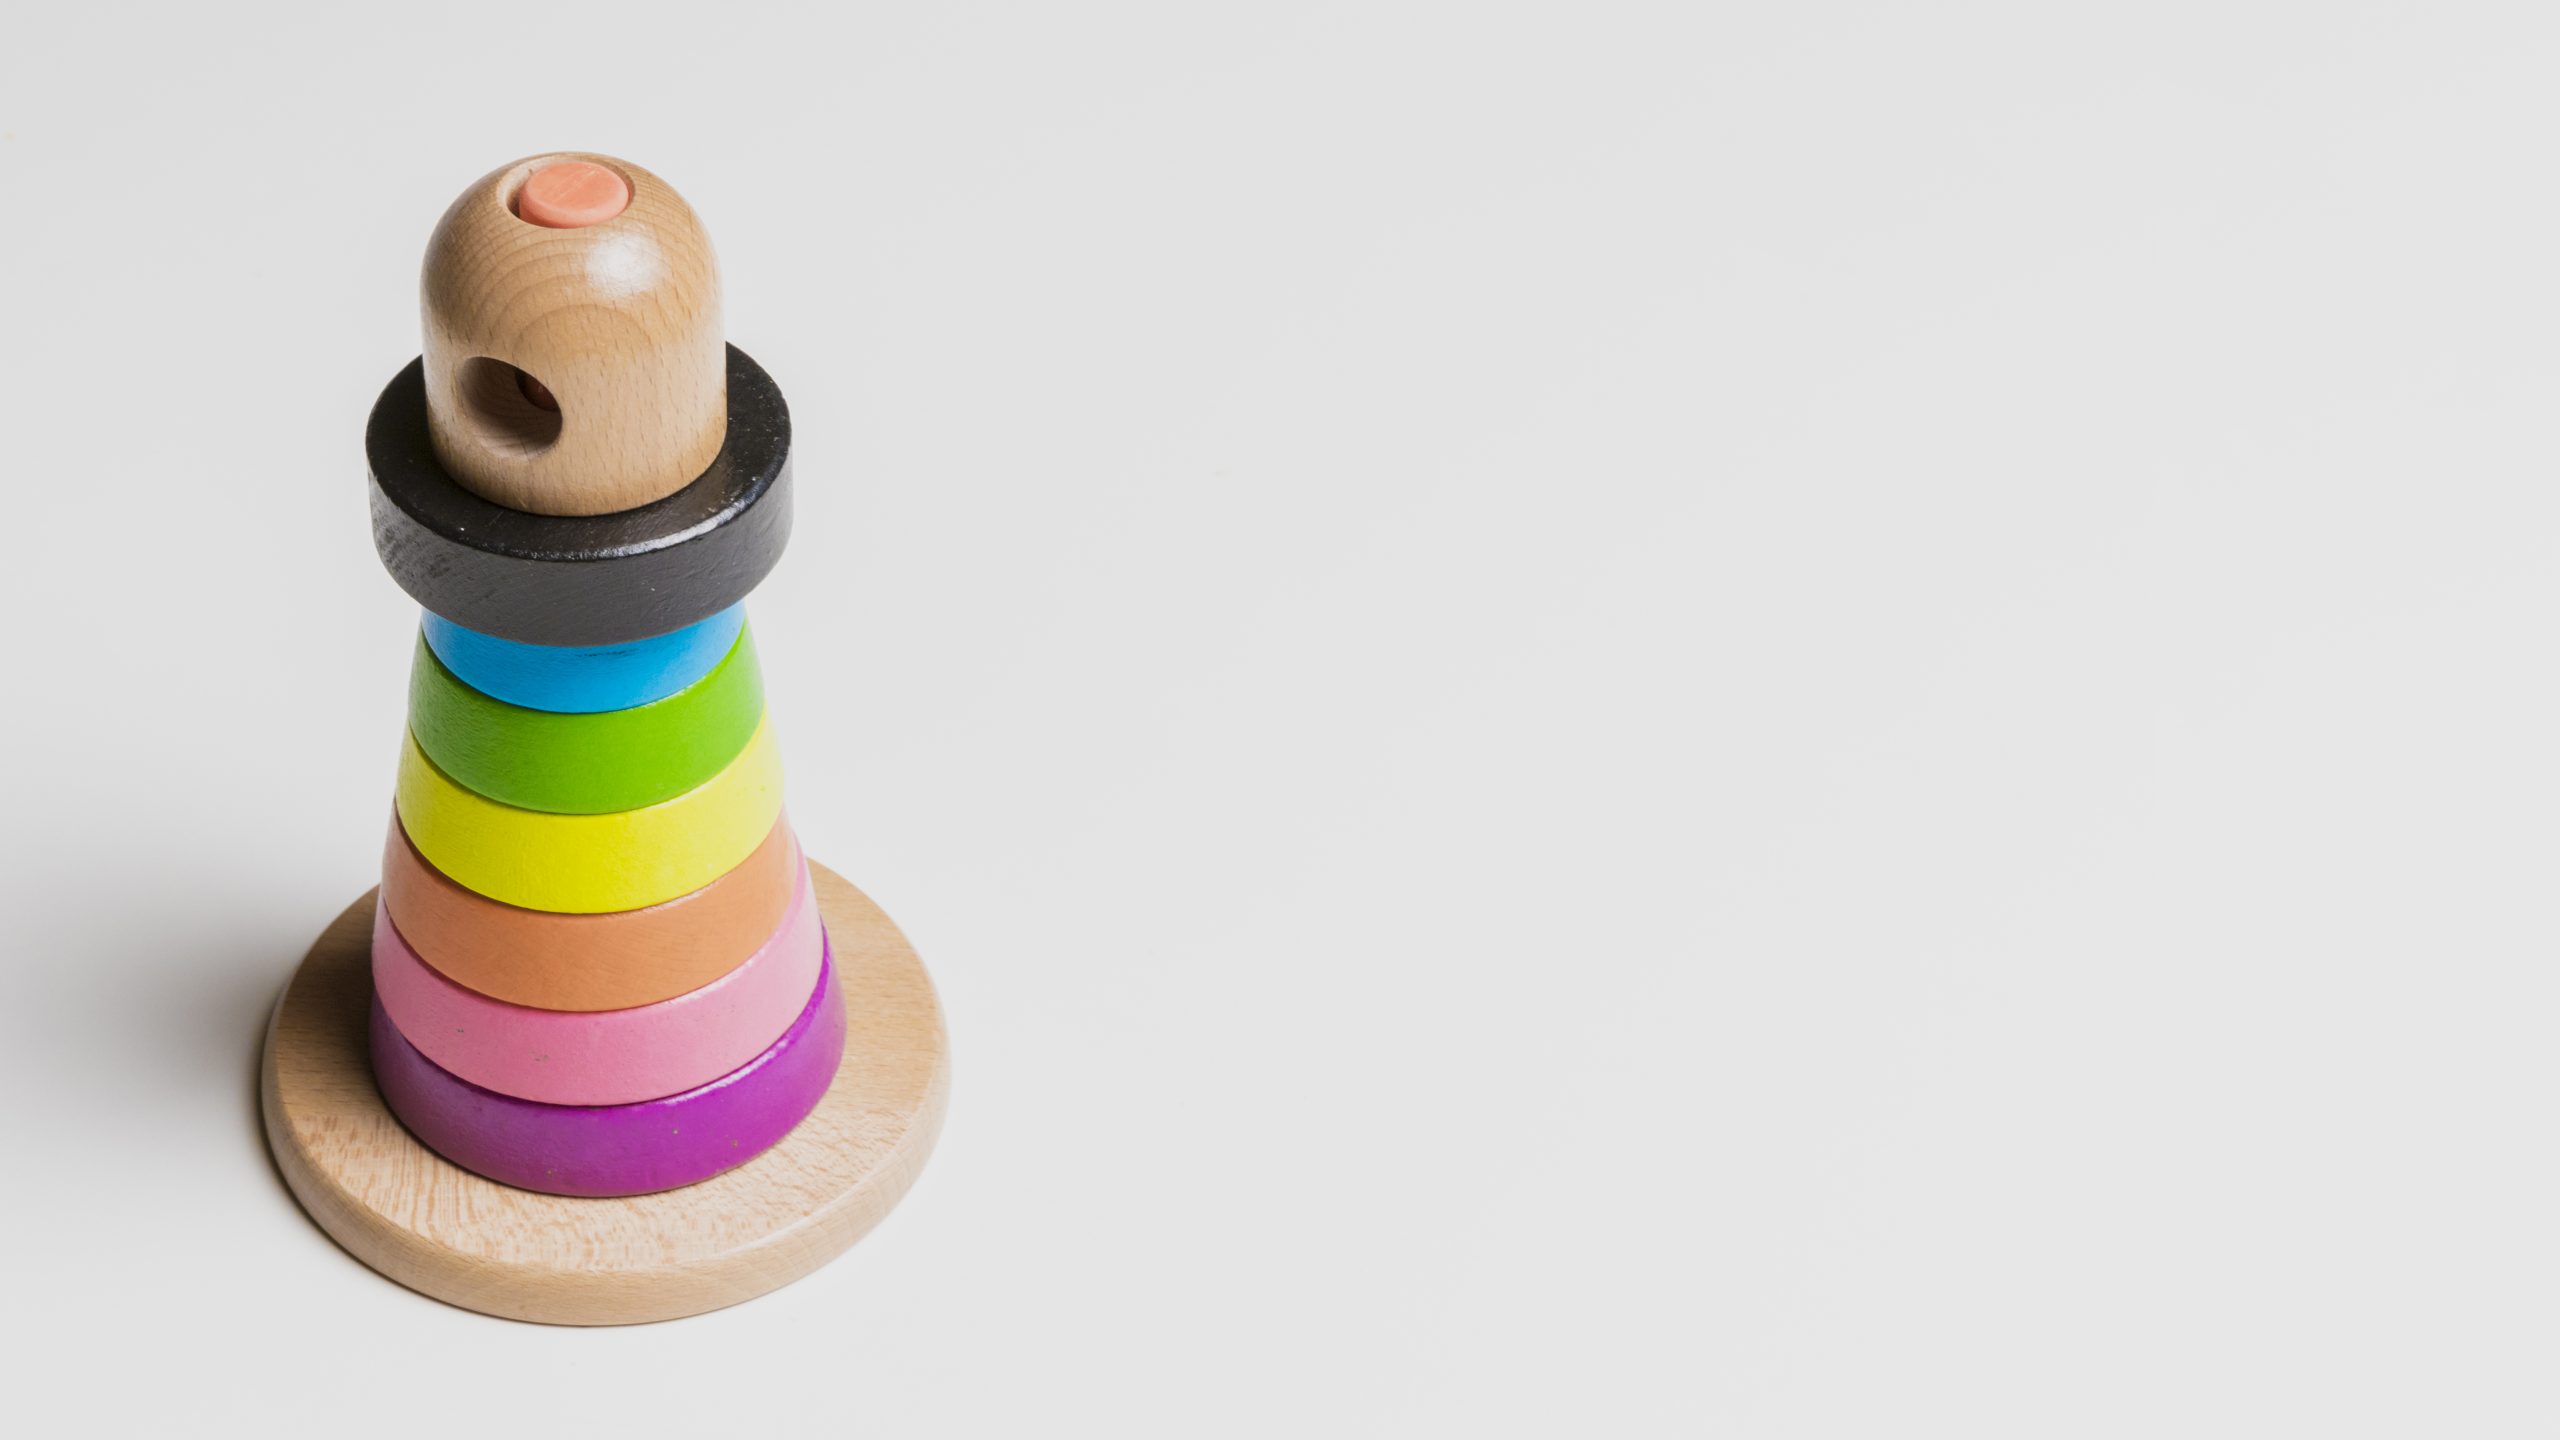 The DIY Joy of Making Wooden Toys: A Fun Family Project